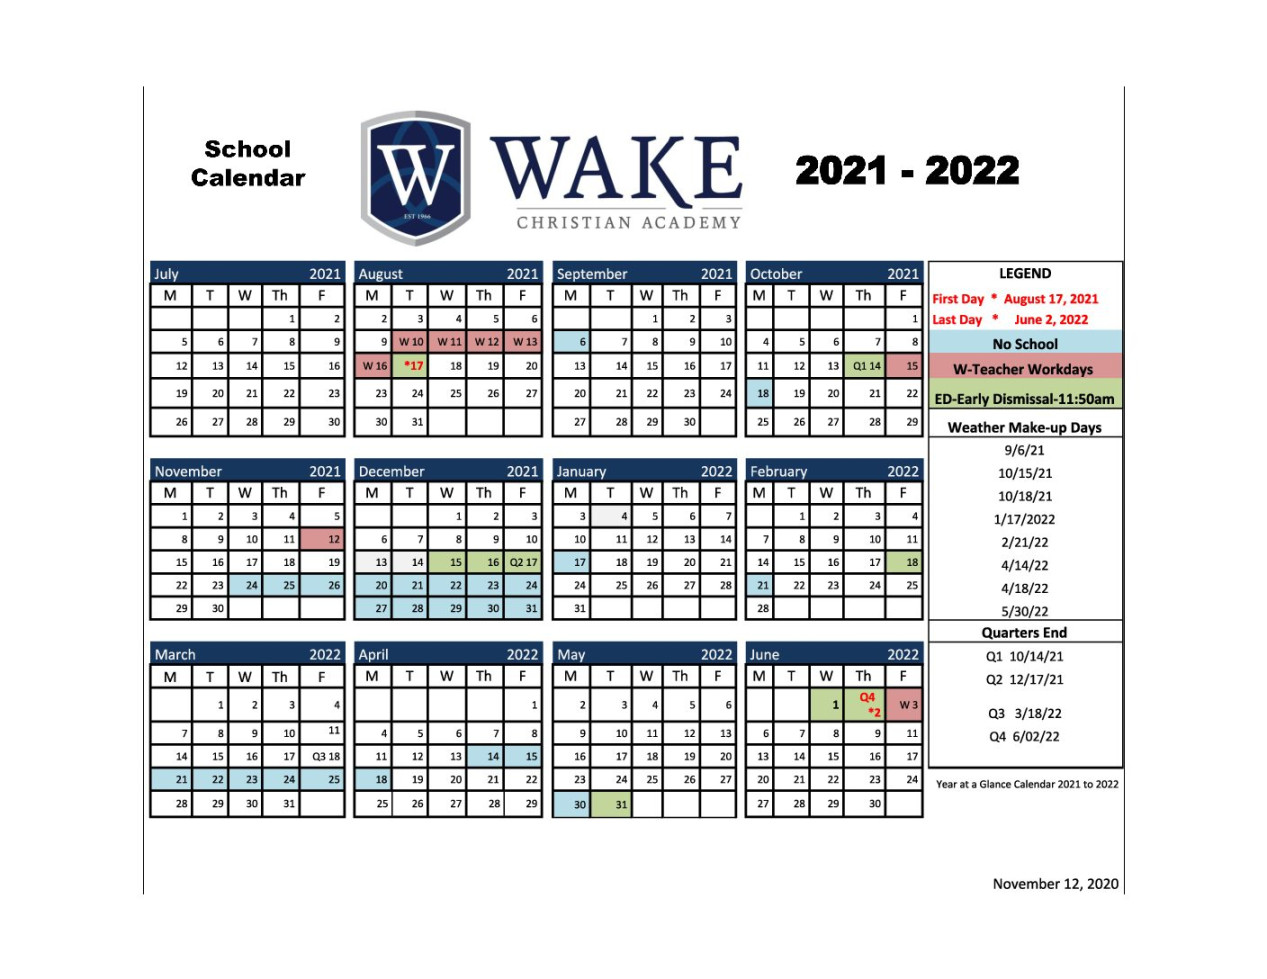 Year at a Glance Calendar  to  - - Revised -